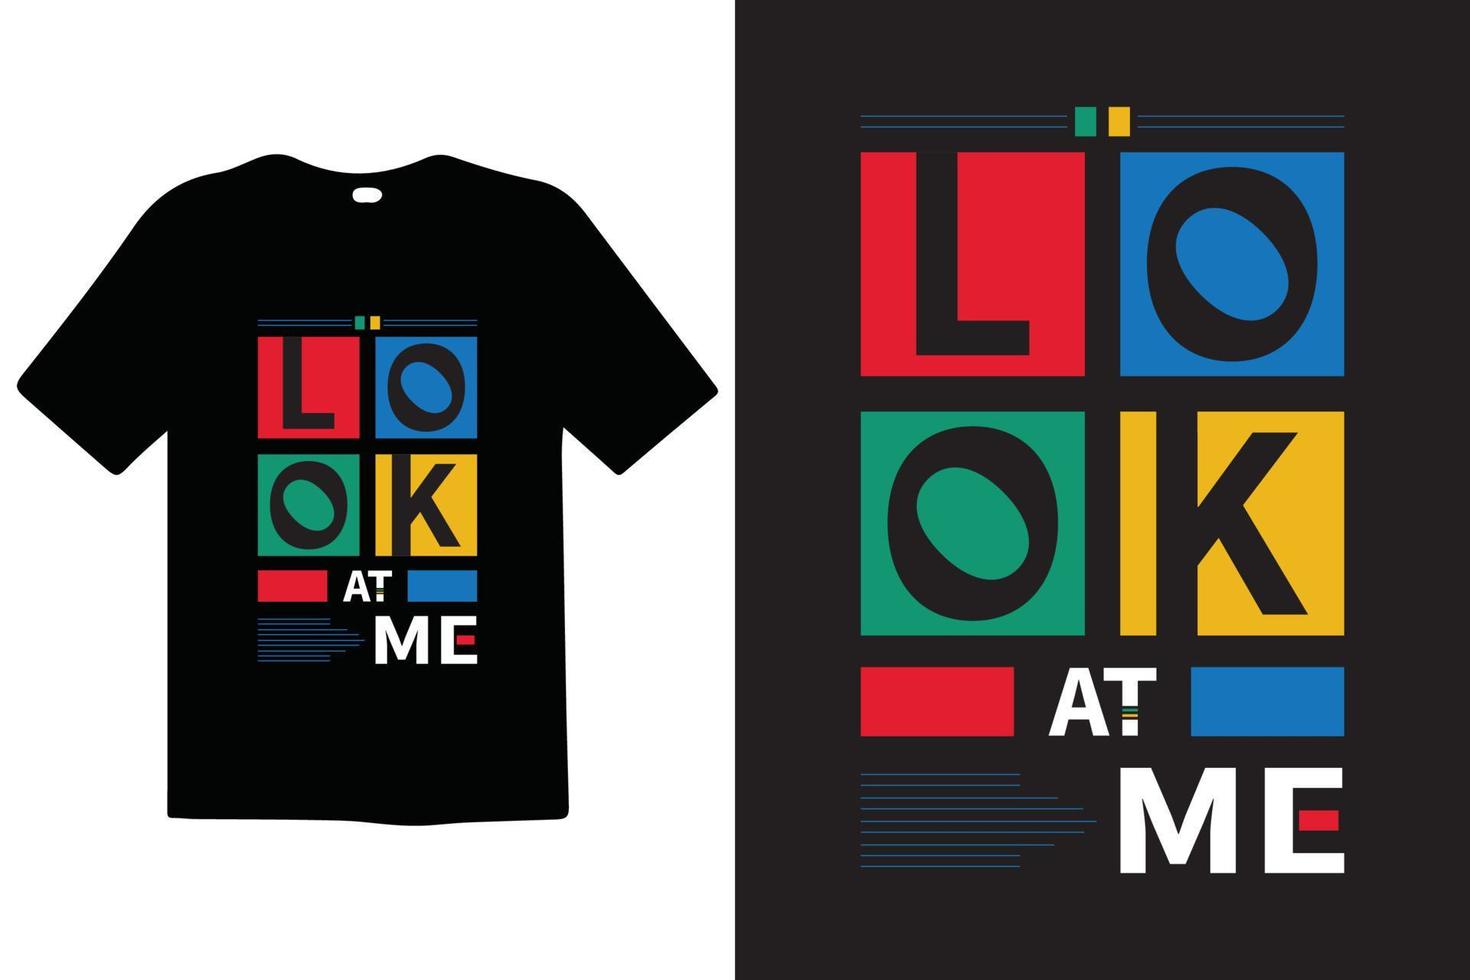 Look at me T shirt Template, calligraphy slogan with broken liberty statue head and skull on black background, modern inspirational quotes t-shirt design ,geometric typography inspirational quotes ads vector